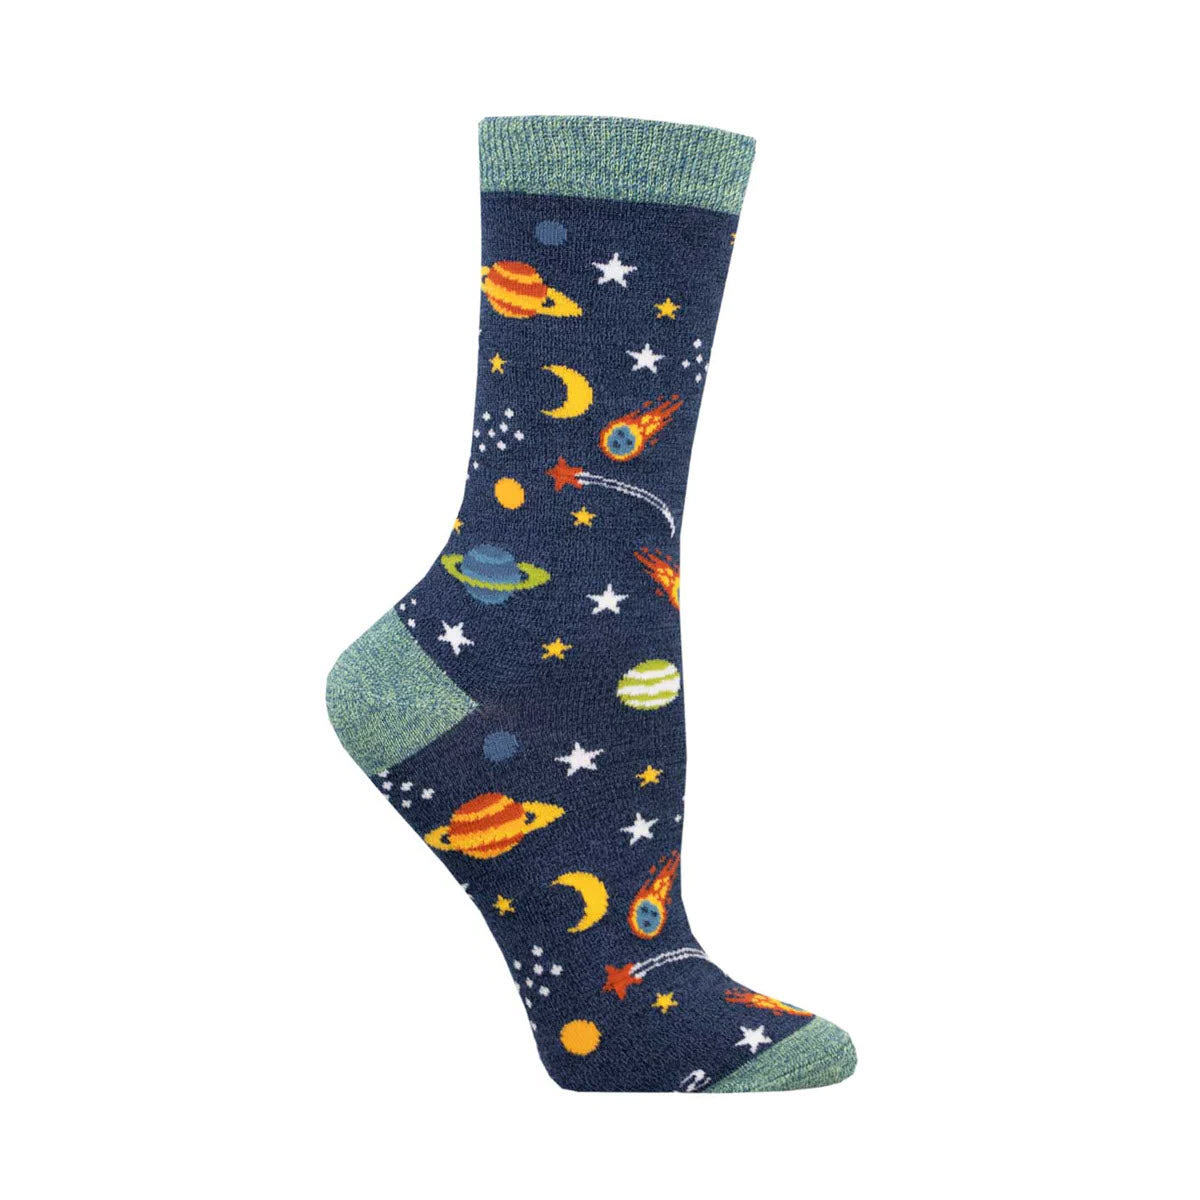 A single SOCKSMITH BAMBOO CREW SOCKS REACH FOR THE STARS NAVY - WOMENS with a colorful "Reach for the Stars" pattern, featuring planets, stars, and rockets on a dark blue background.